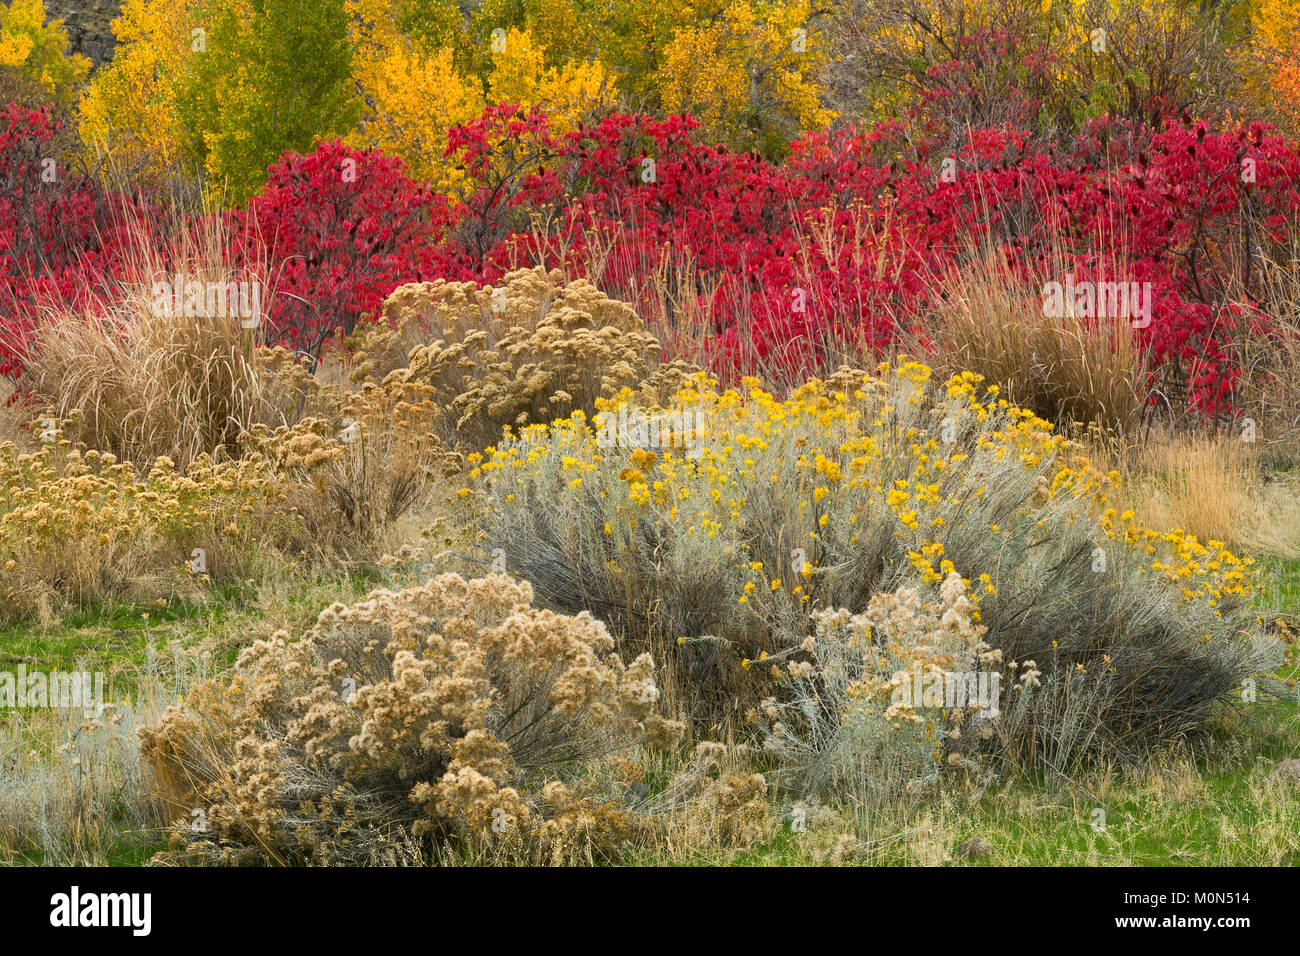 A wild garden of plants along a streambed in the Great Basin Desert of Washington. Rabbitbrush, sage, sumac, and cottonwood make for a colorful fall.  Stock Photo